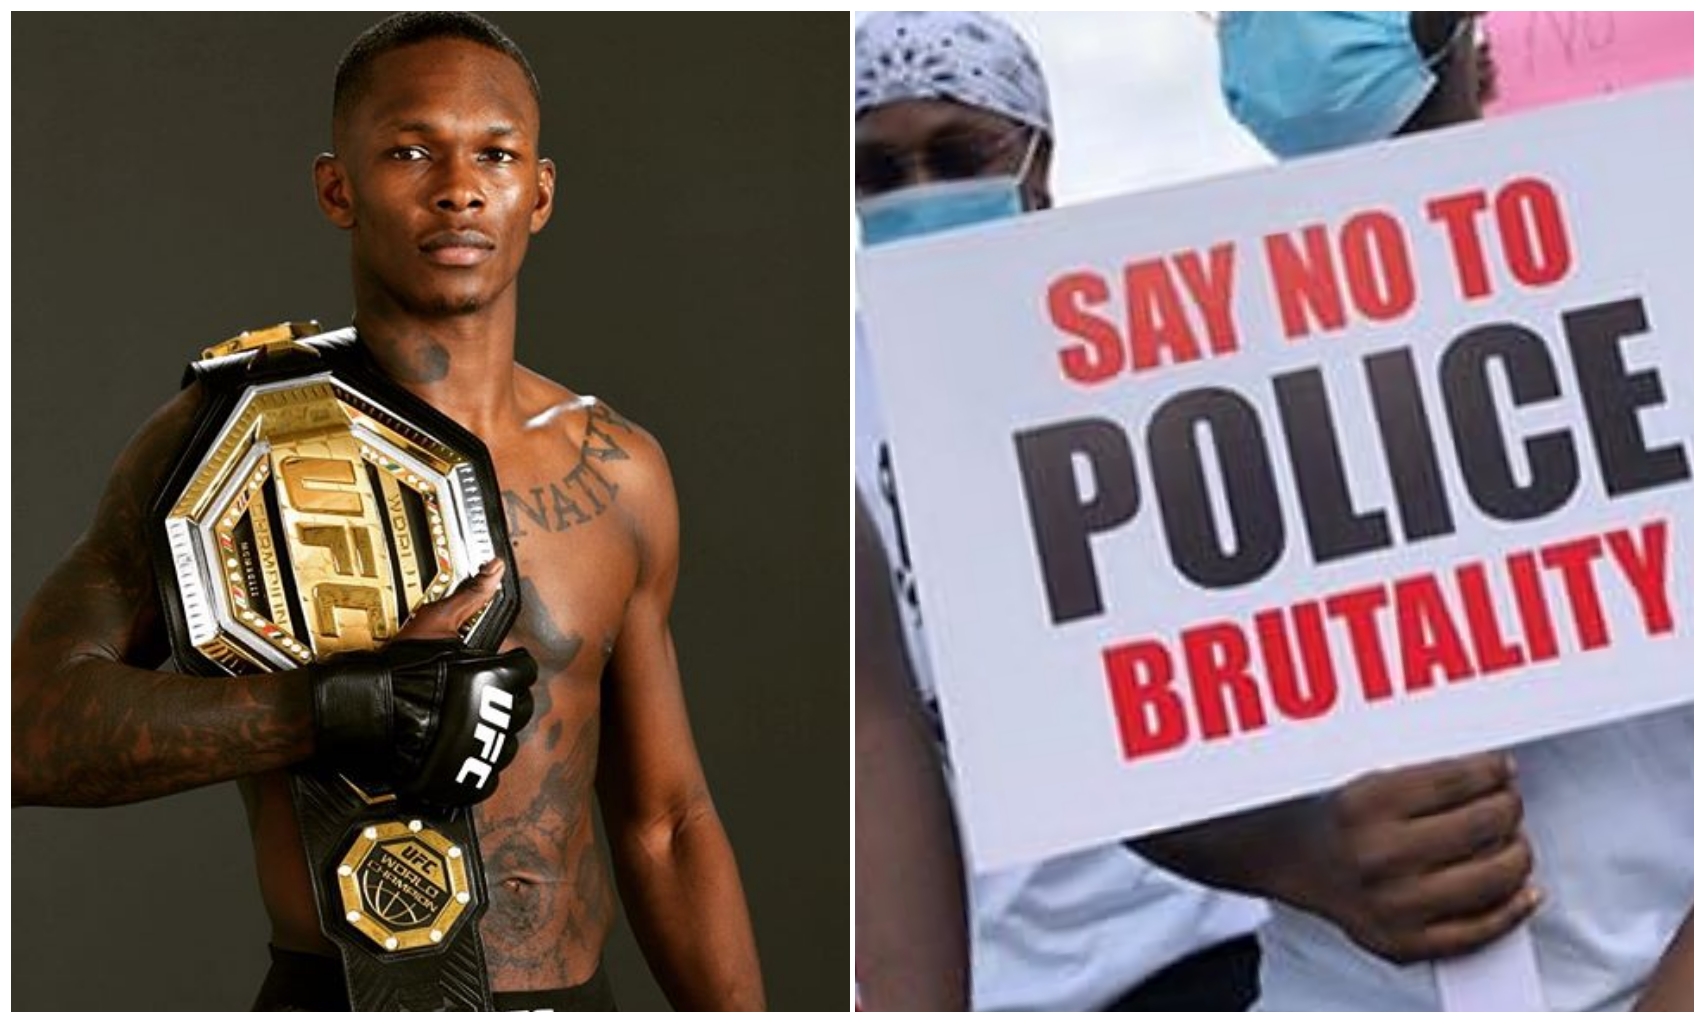 UFC Champion, Isreal Adesanya touch down in Nigeria to join EndSars protest